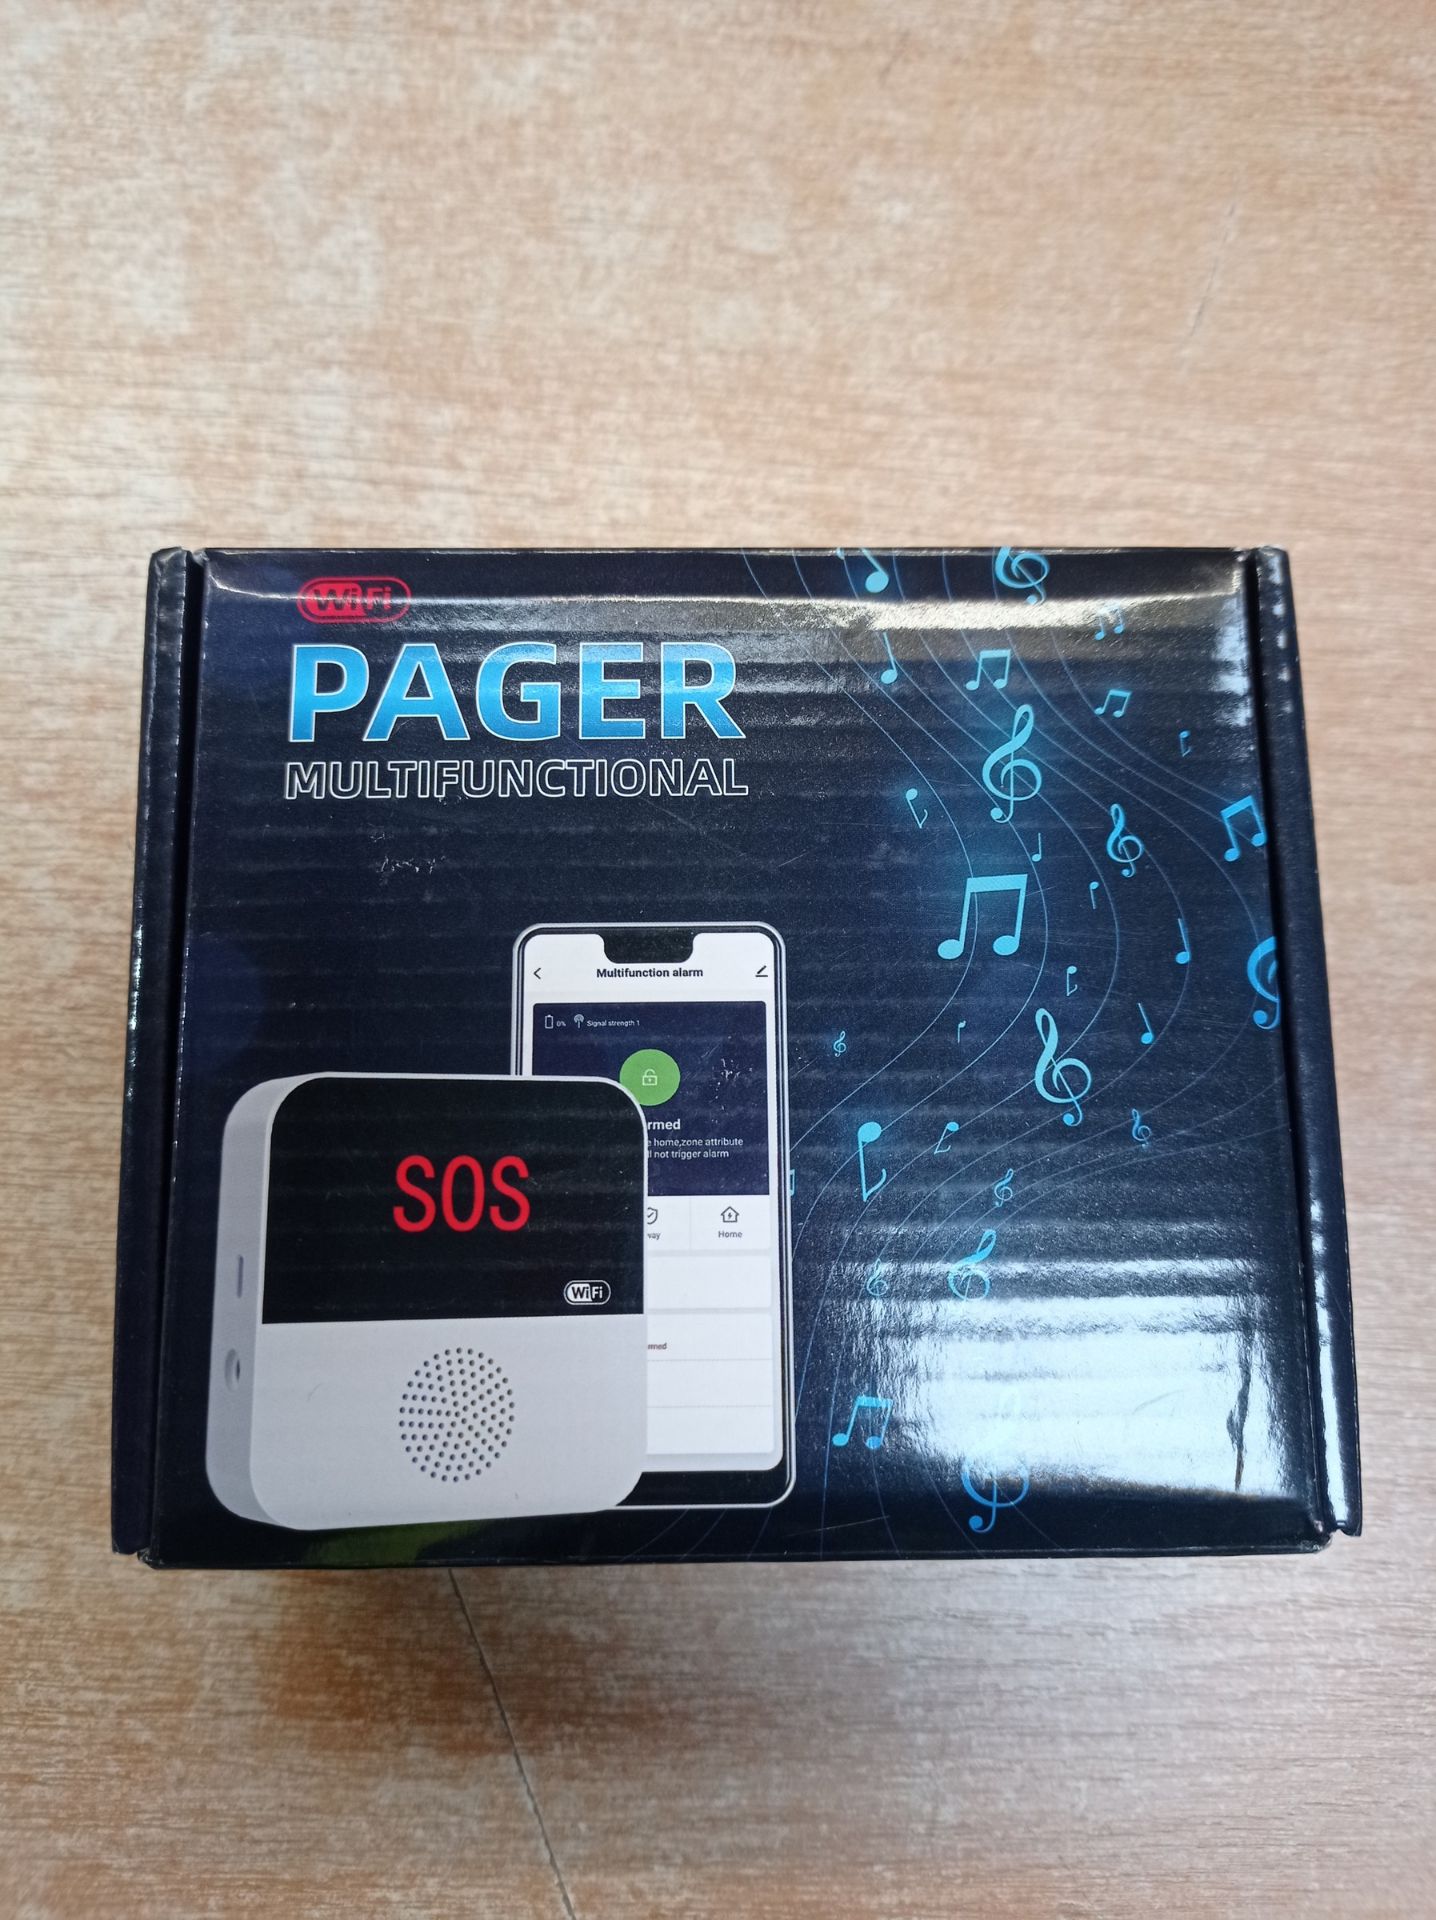 RRP £61.64 ChunHee WiFi Smart Wireless Caregiver Pager Panic Button Linked To Phone